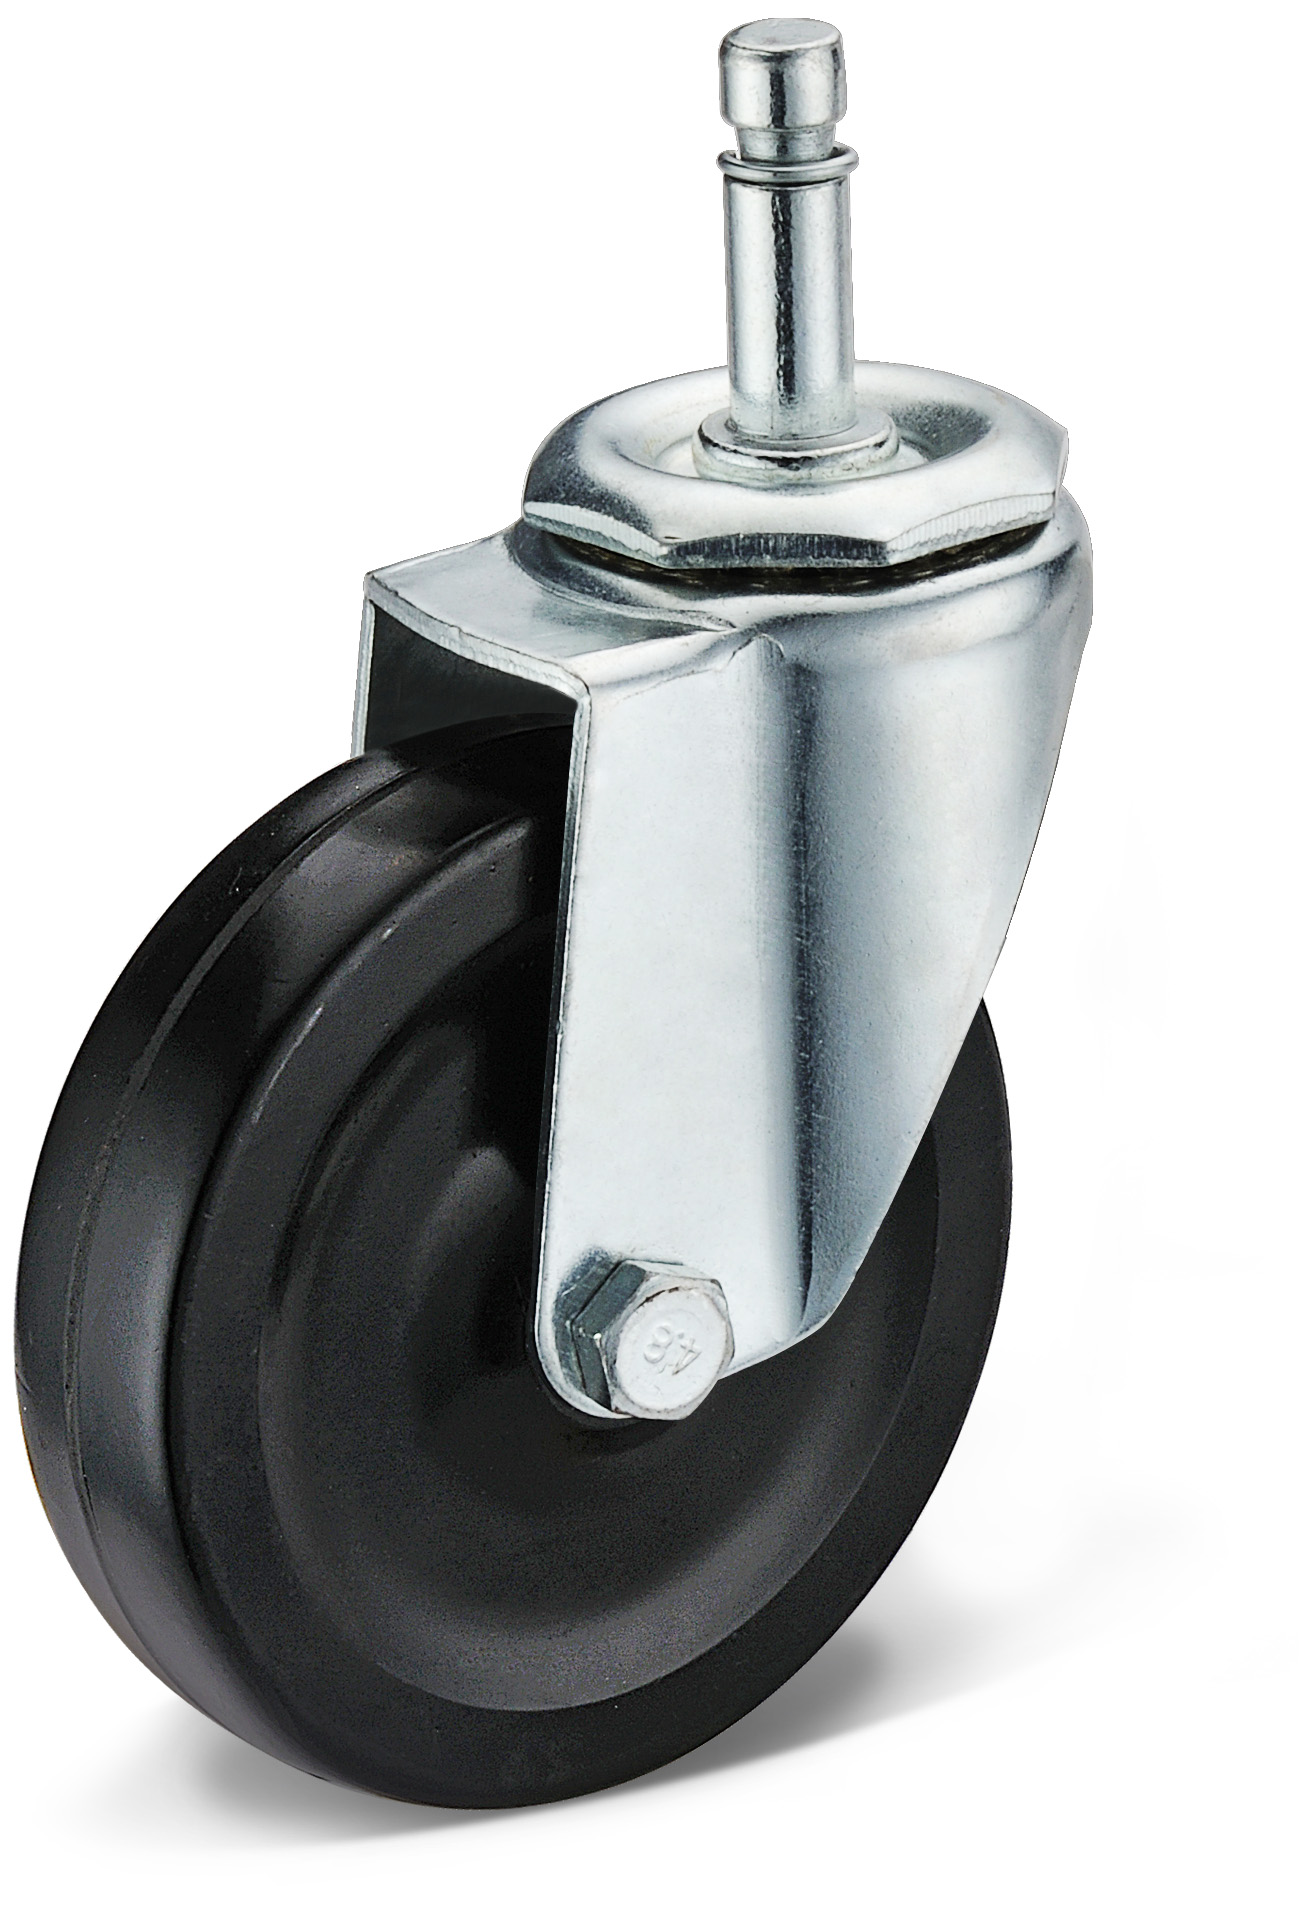 Buy high quality trolley casters online